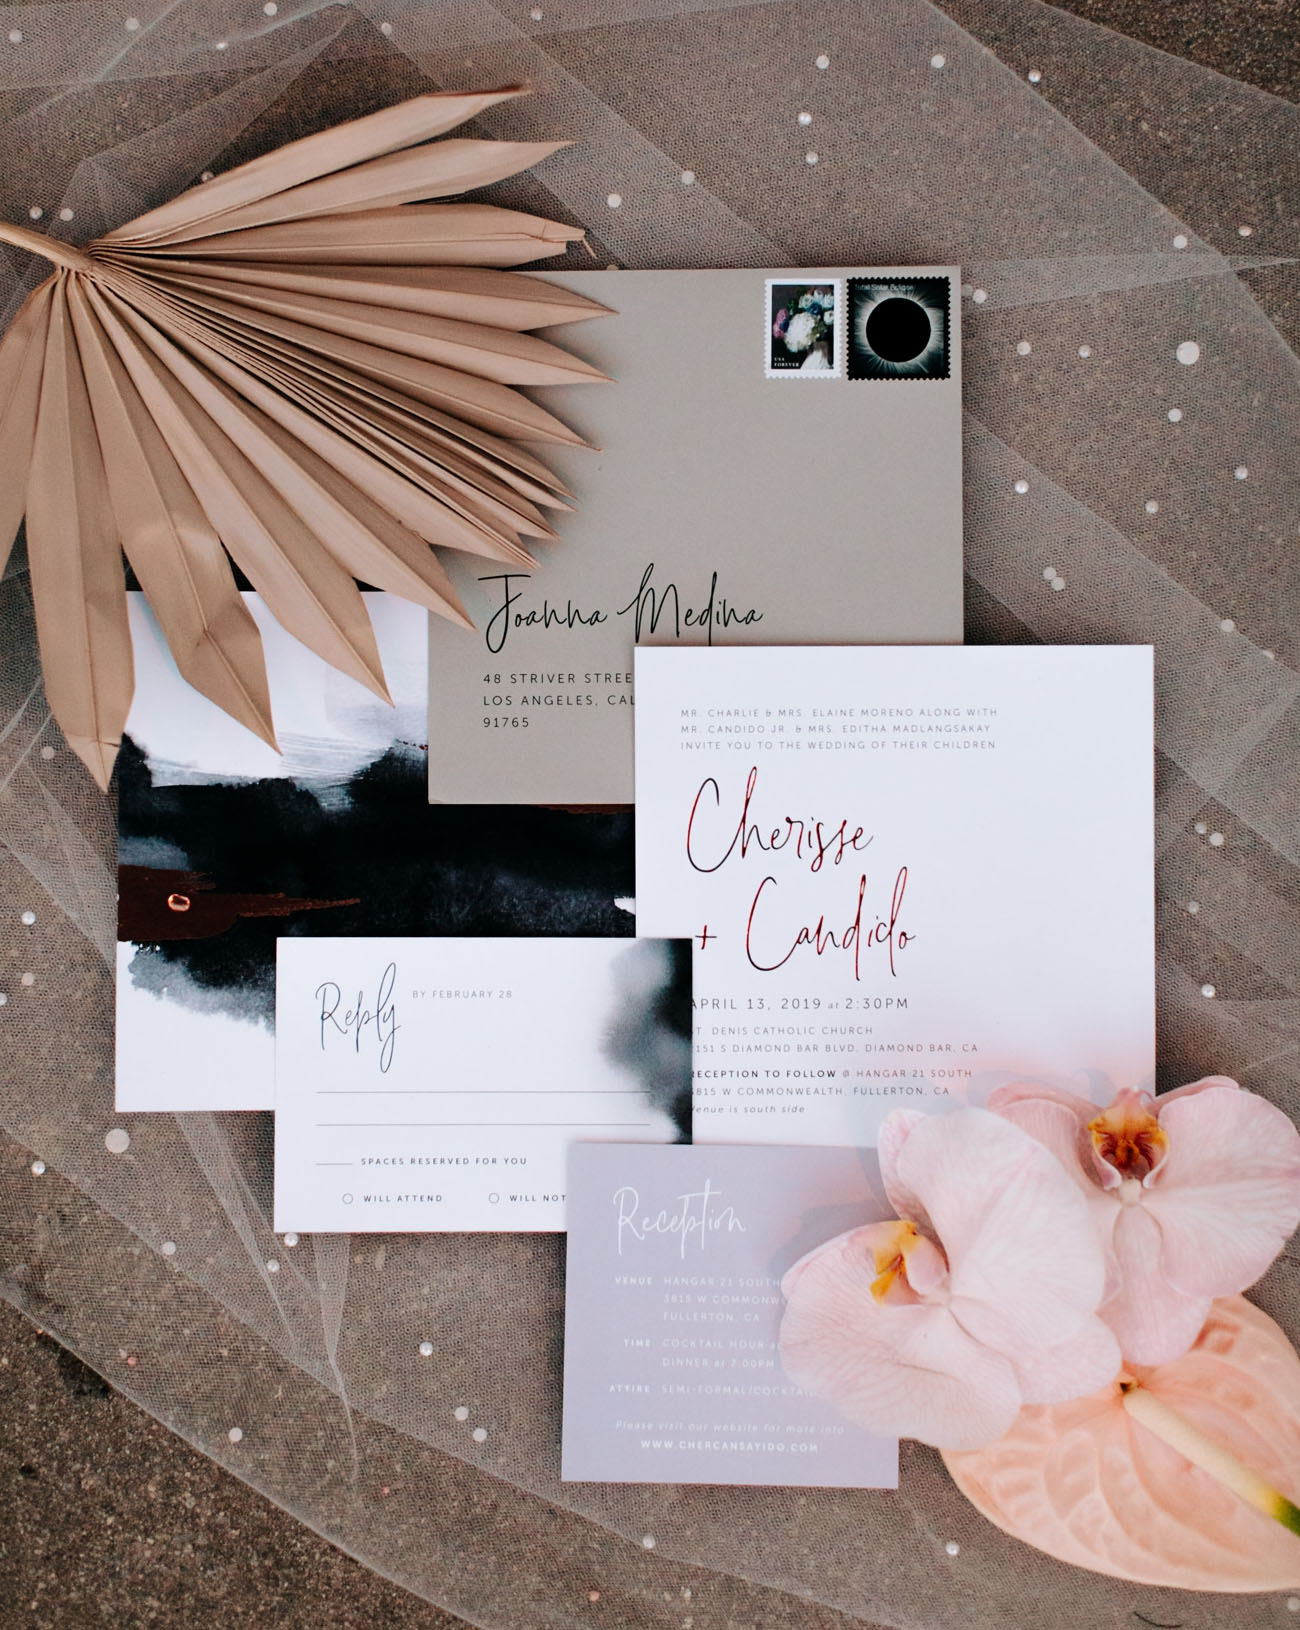 The wedding invitations were done in neutrals, black and with ombre effects  plus calligraphy